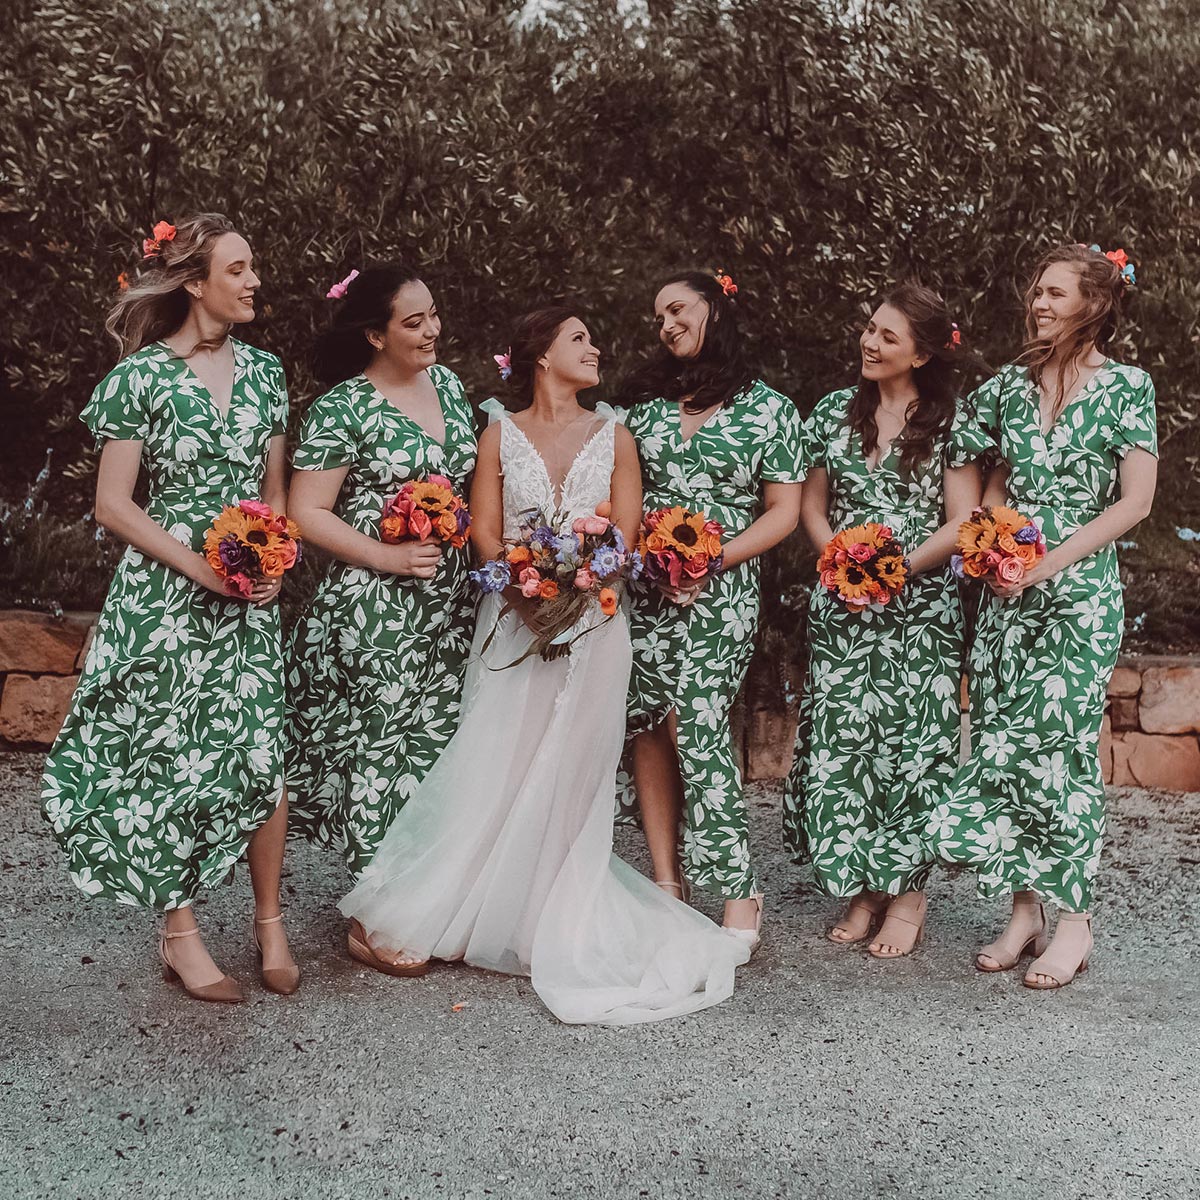 Bride in white gown with bridesmaids in green floral dresses holding colourful bouquets, celebrating outdoors. Fabulous Flowers and Gifts. Weddings